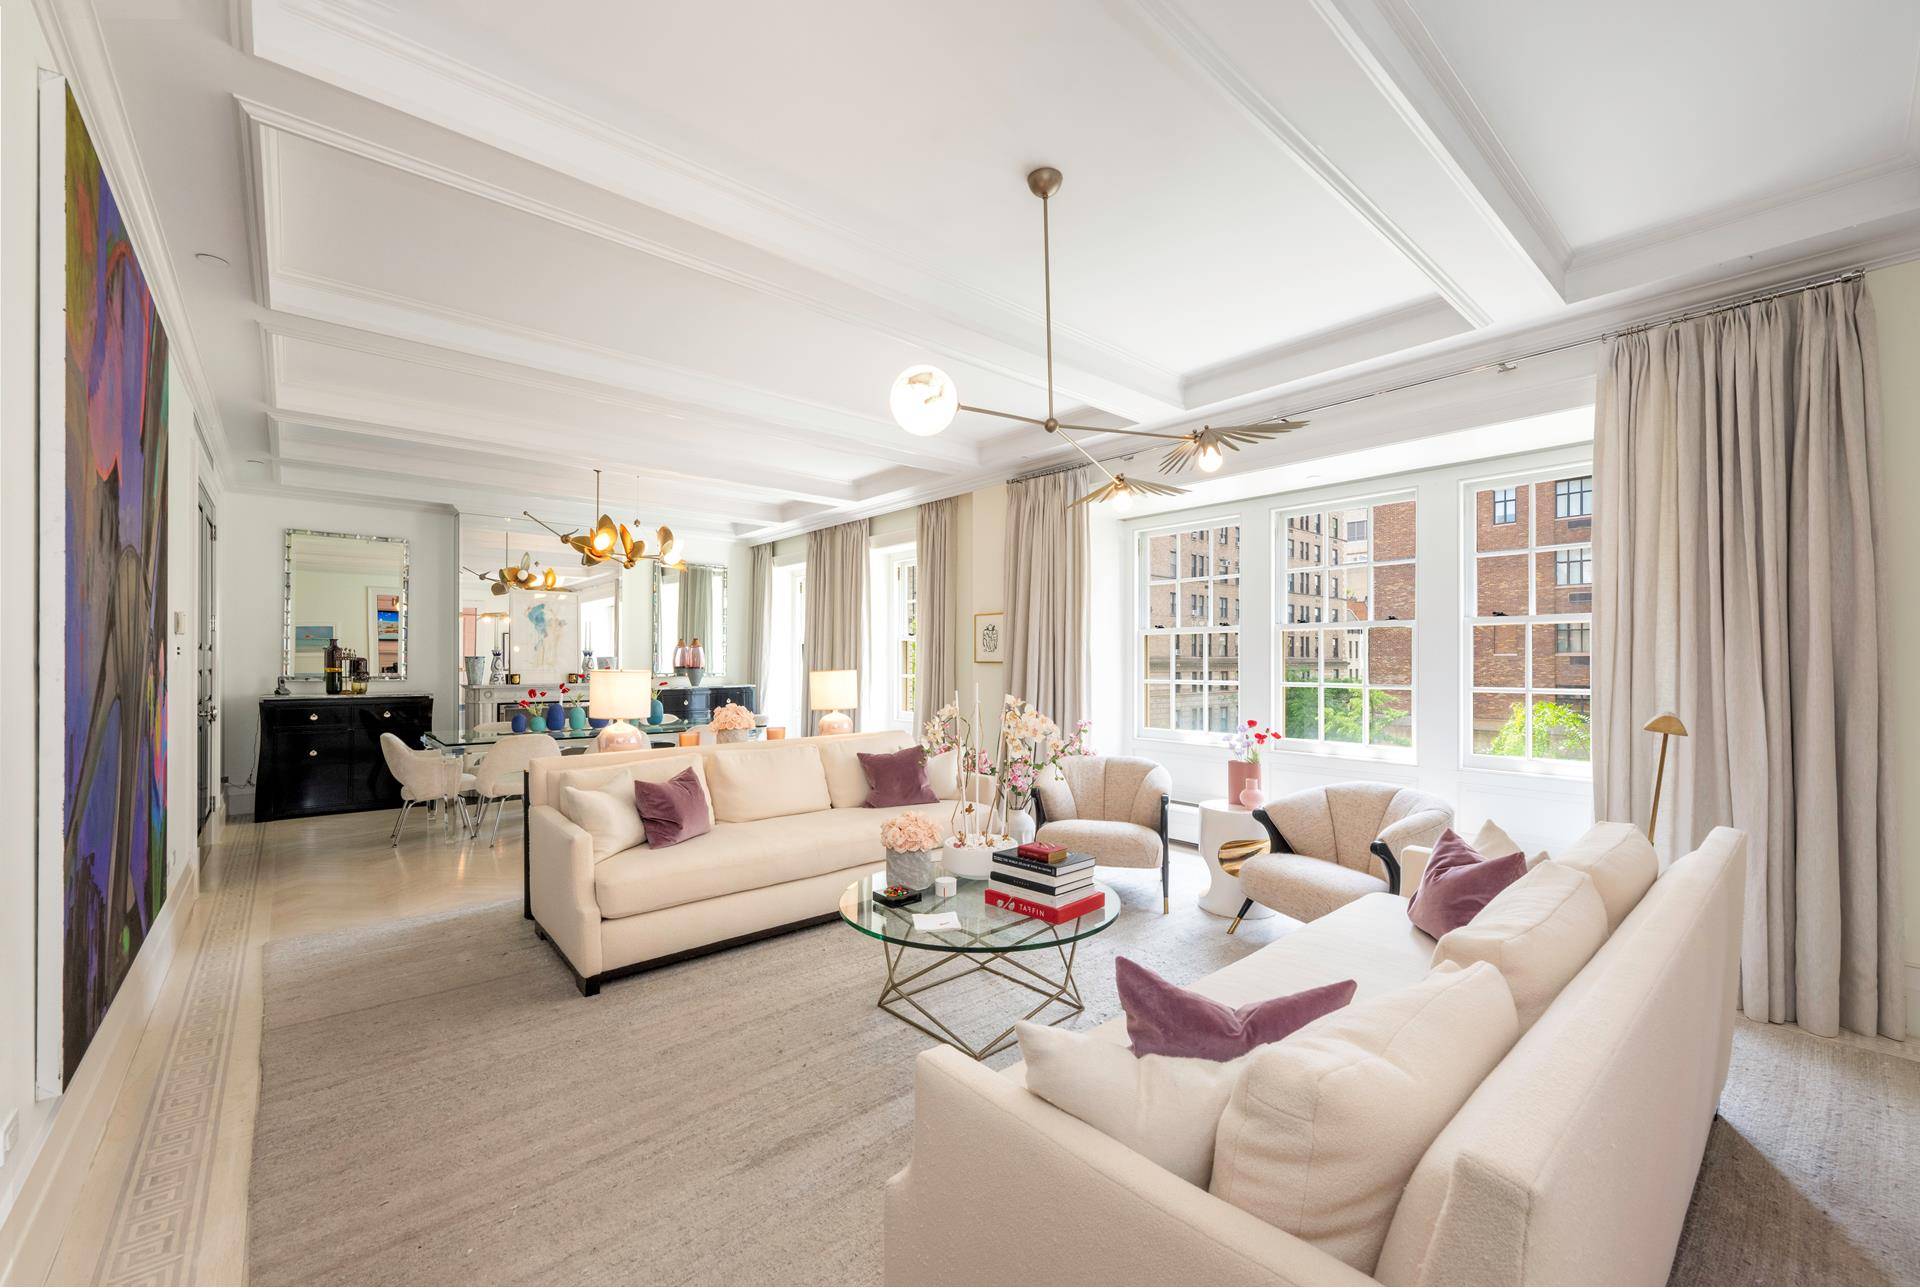 Experience the epitome of luxury living in this meticulously designed full floor prewar condo on Park Avenue, designed by the renowned decorator Sara Story.